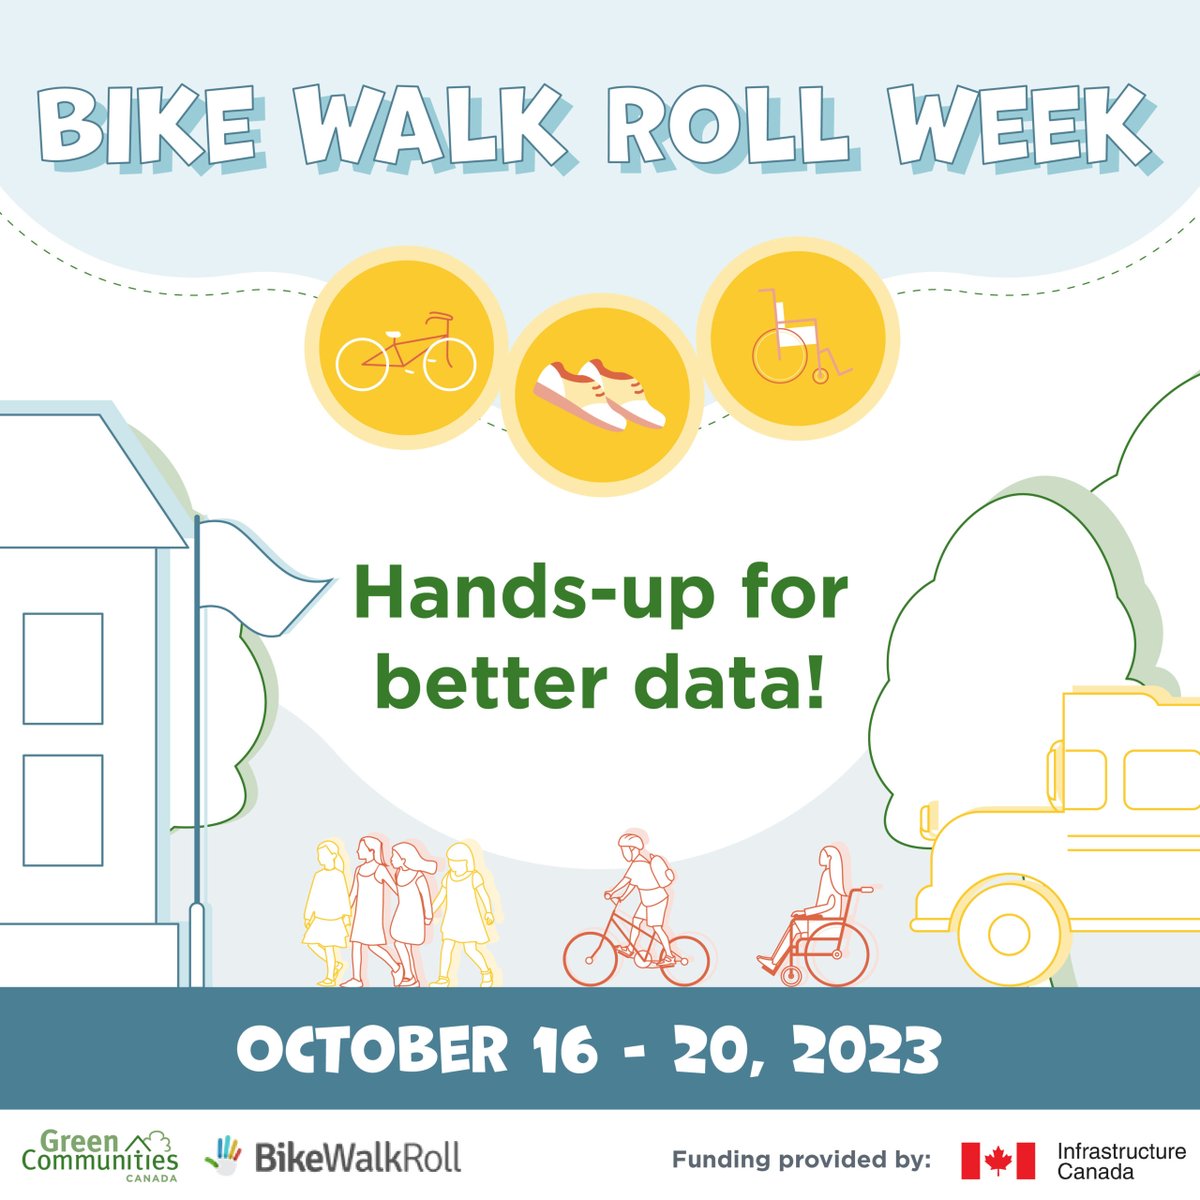 📢 Calling all teachers! Tell us how your students travel to school with a short 30-second hands-up survey. From October 16-20, 2023, join the nation-wide #BikeWalkRollWeek movement to collect better #SchoolTravel data! schooltravel.ca/bike-walk-roll… @greencommunitiesscan #Cranbrook